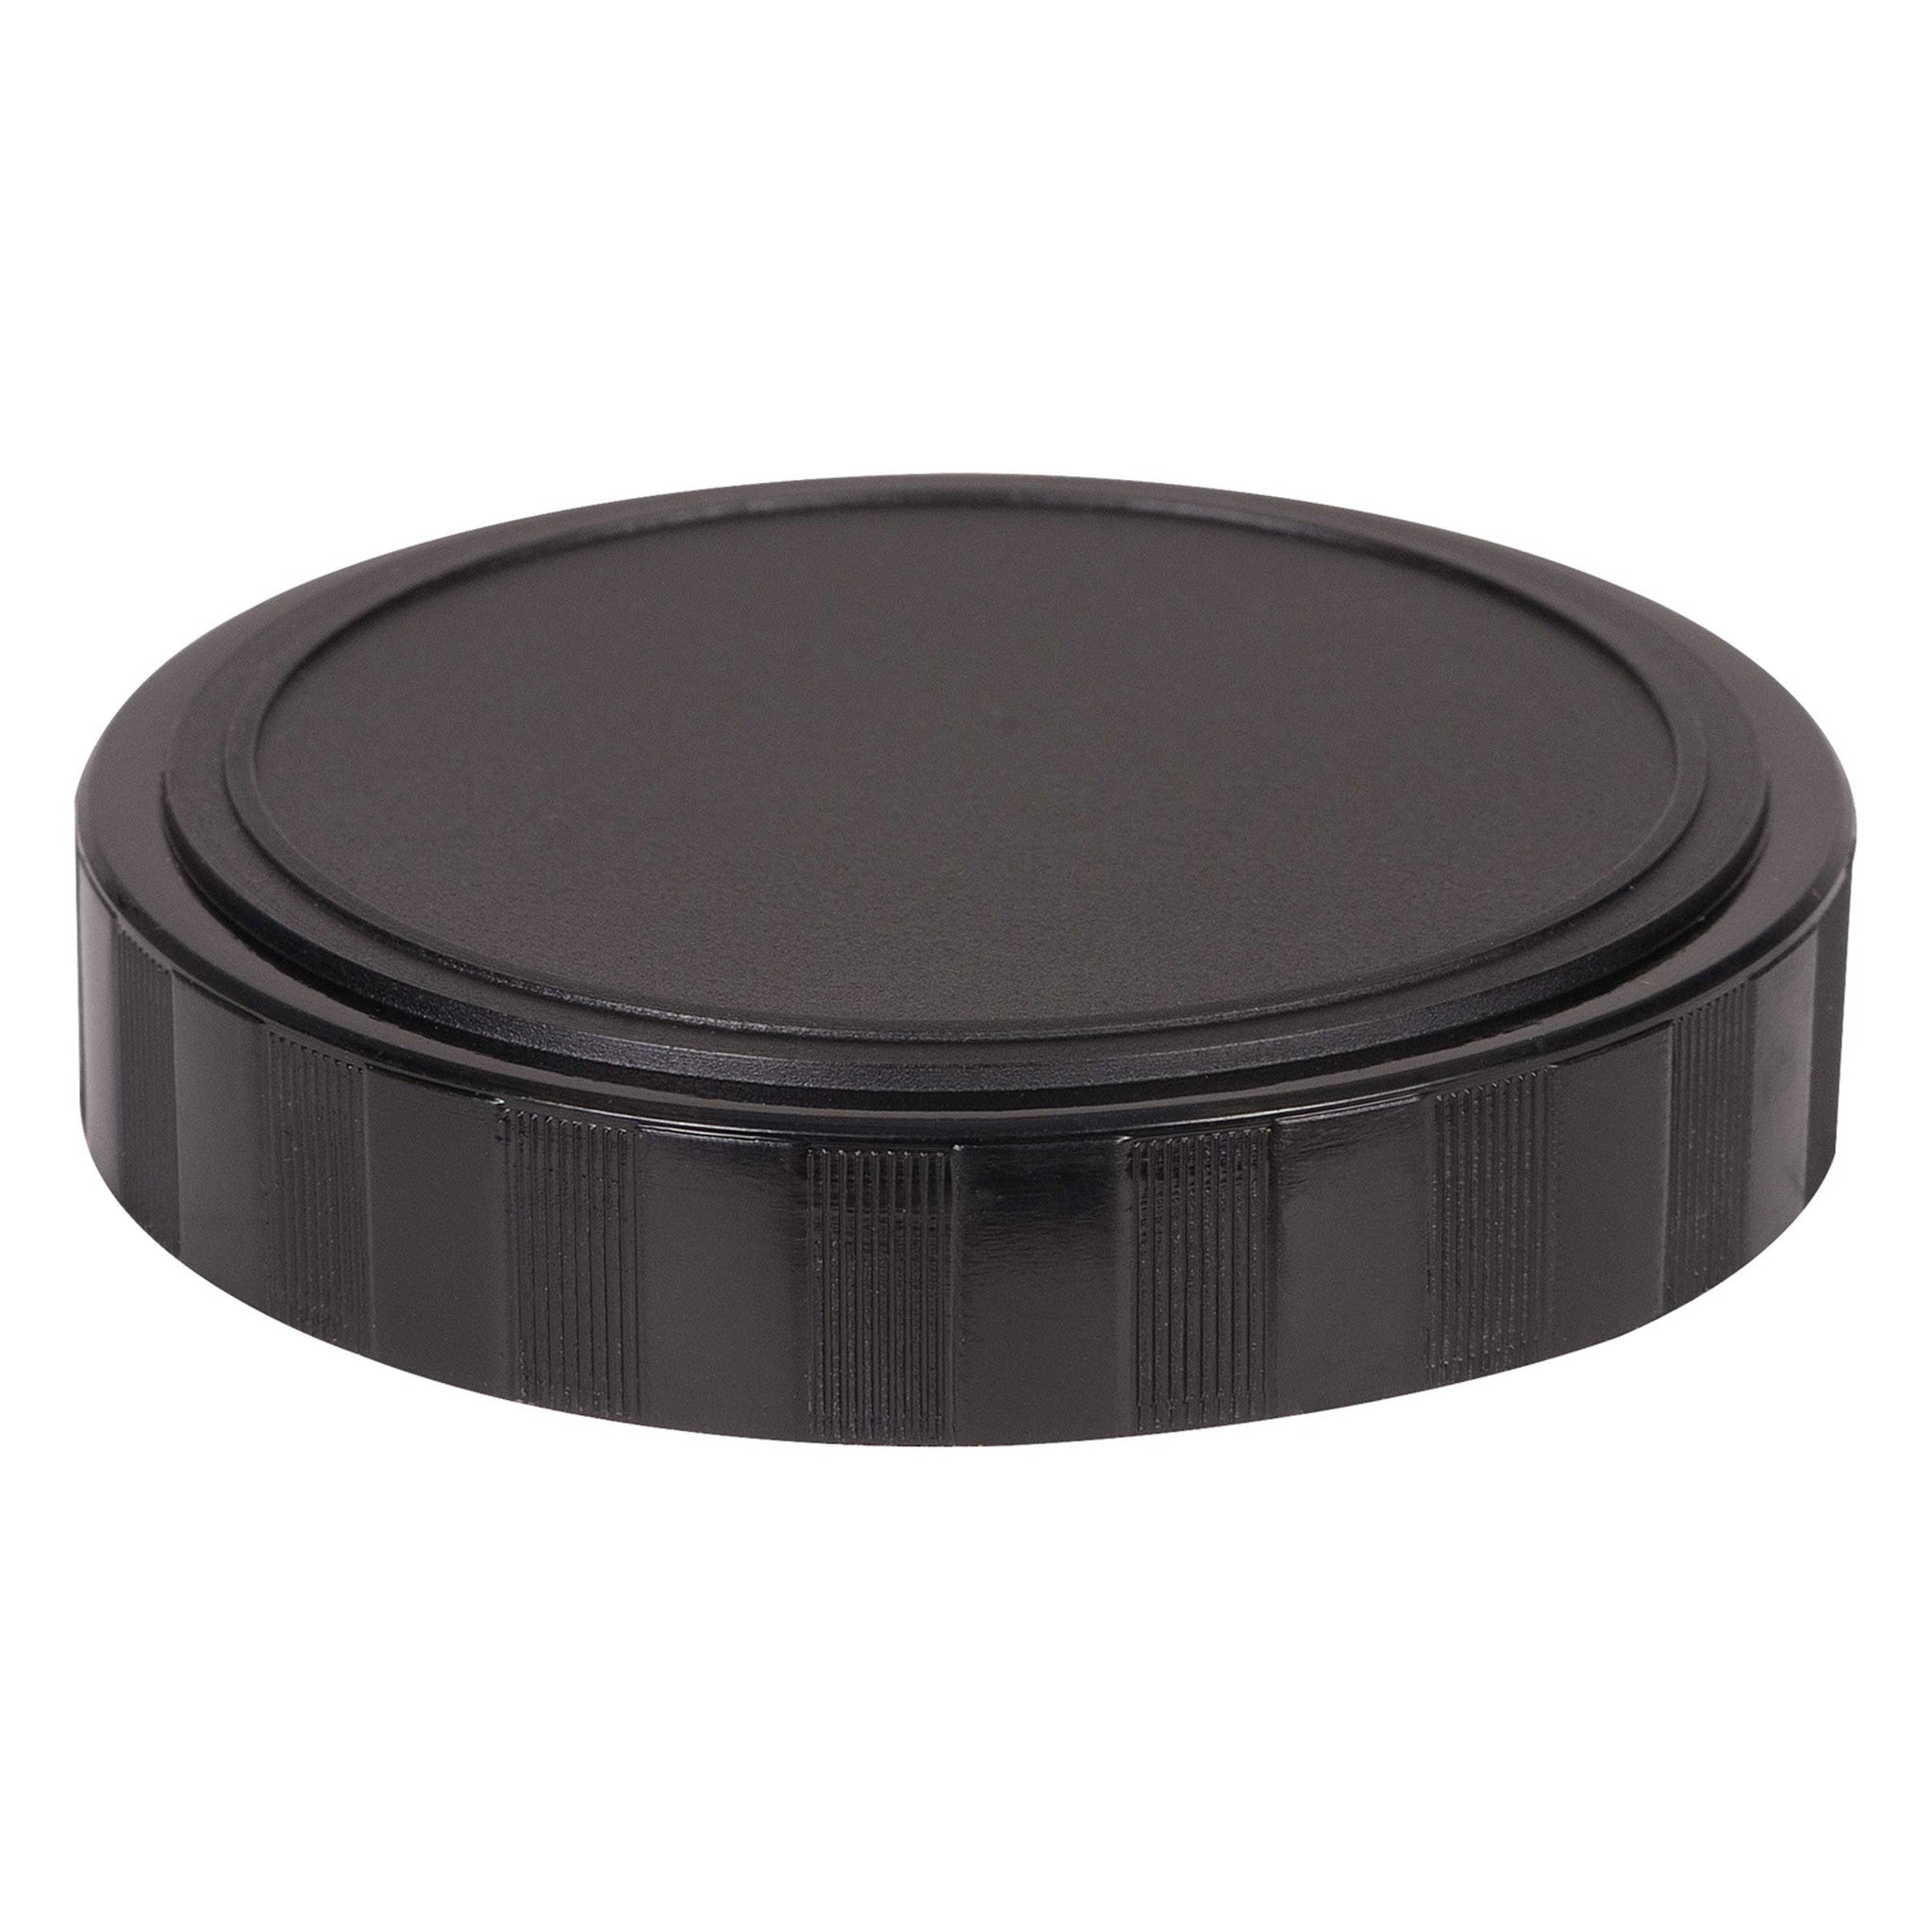 Rear Lens Cap for W-30 Wide Angle Lens